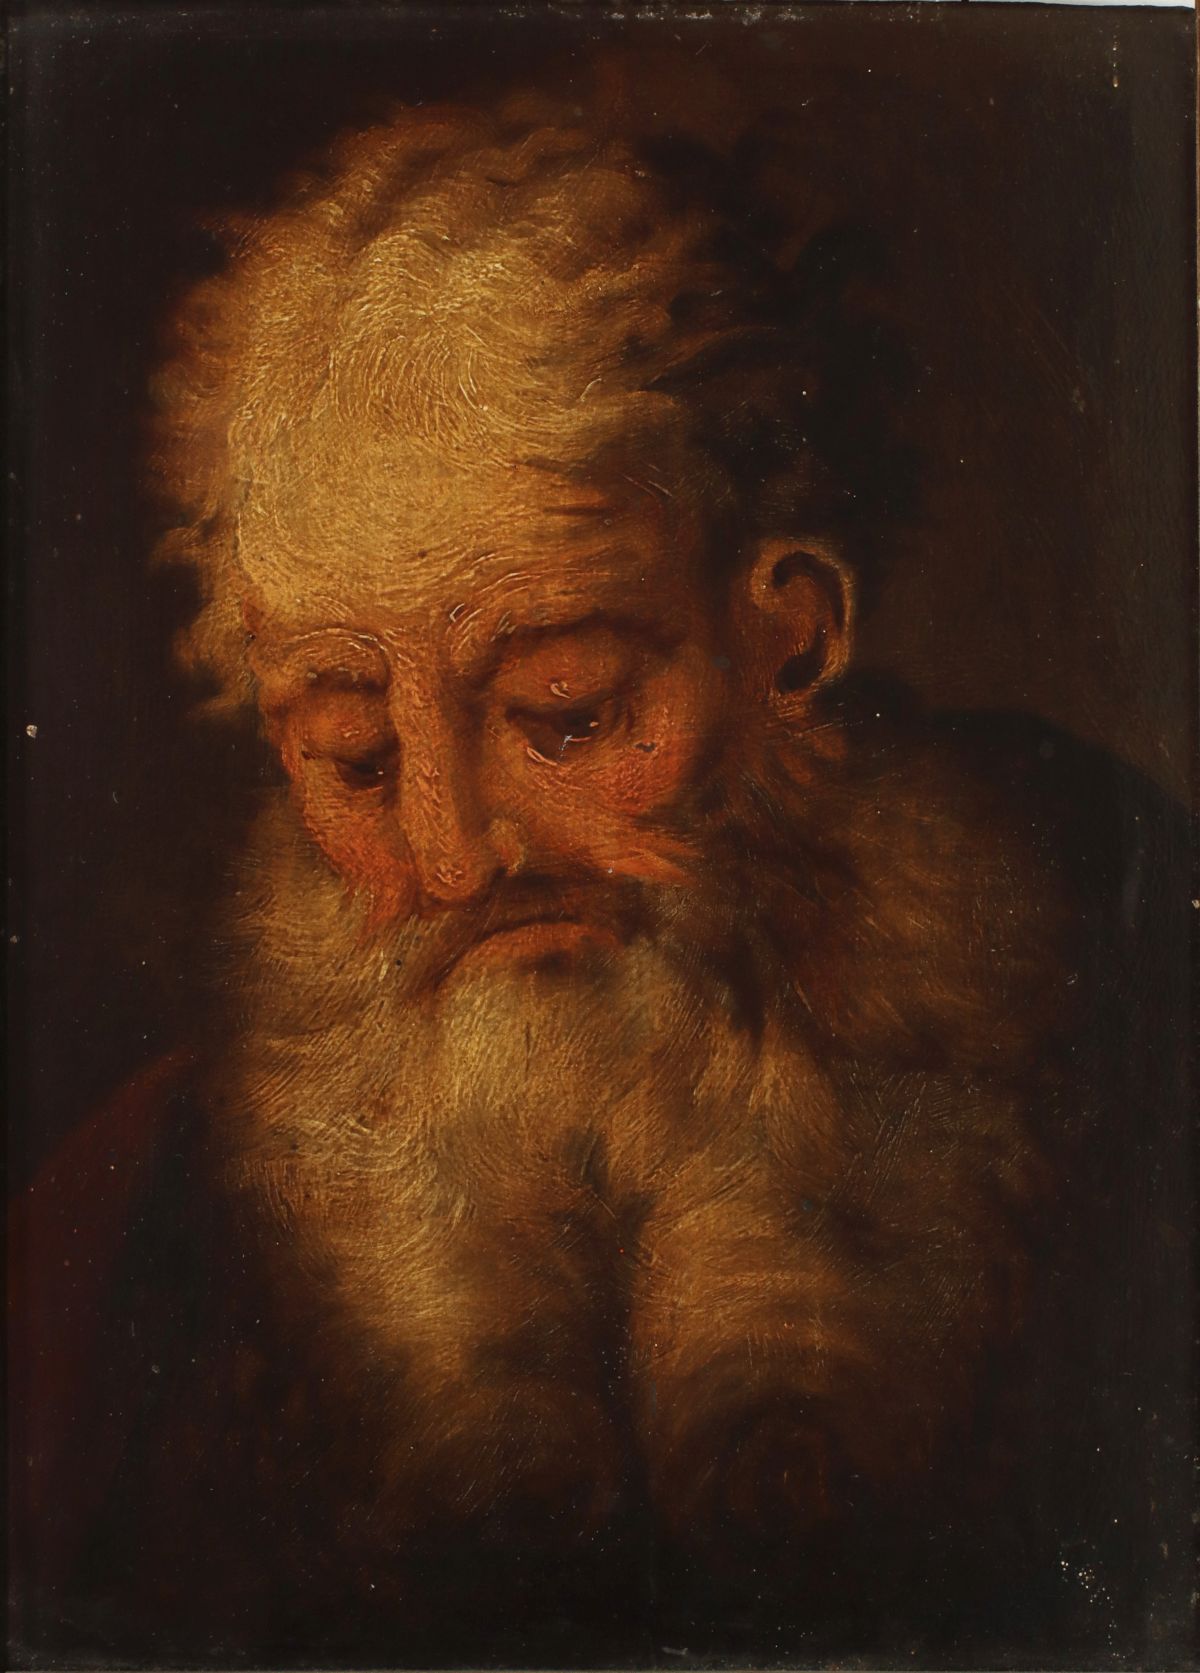 OIL ON PANEL HEAD OF AN APOSTLE IN THE 17TH C. STYLE